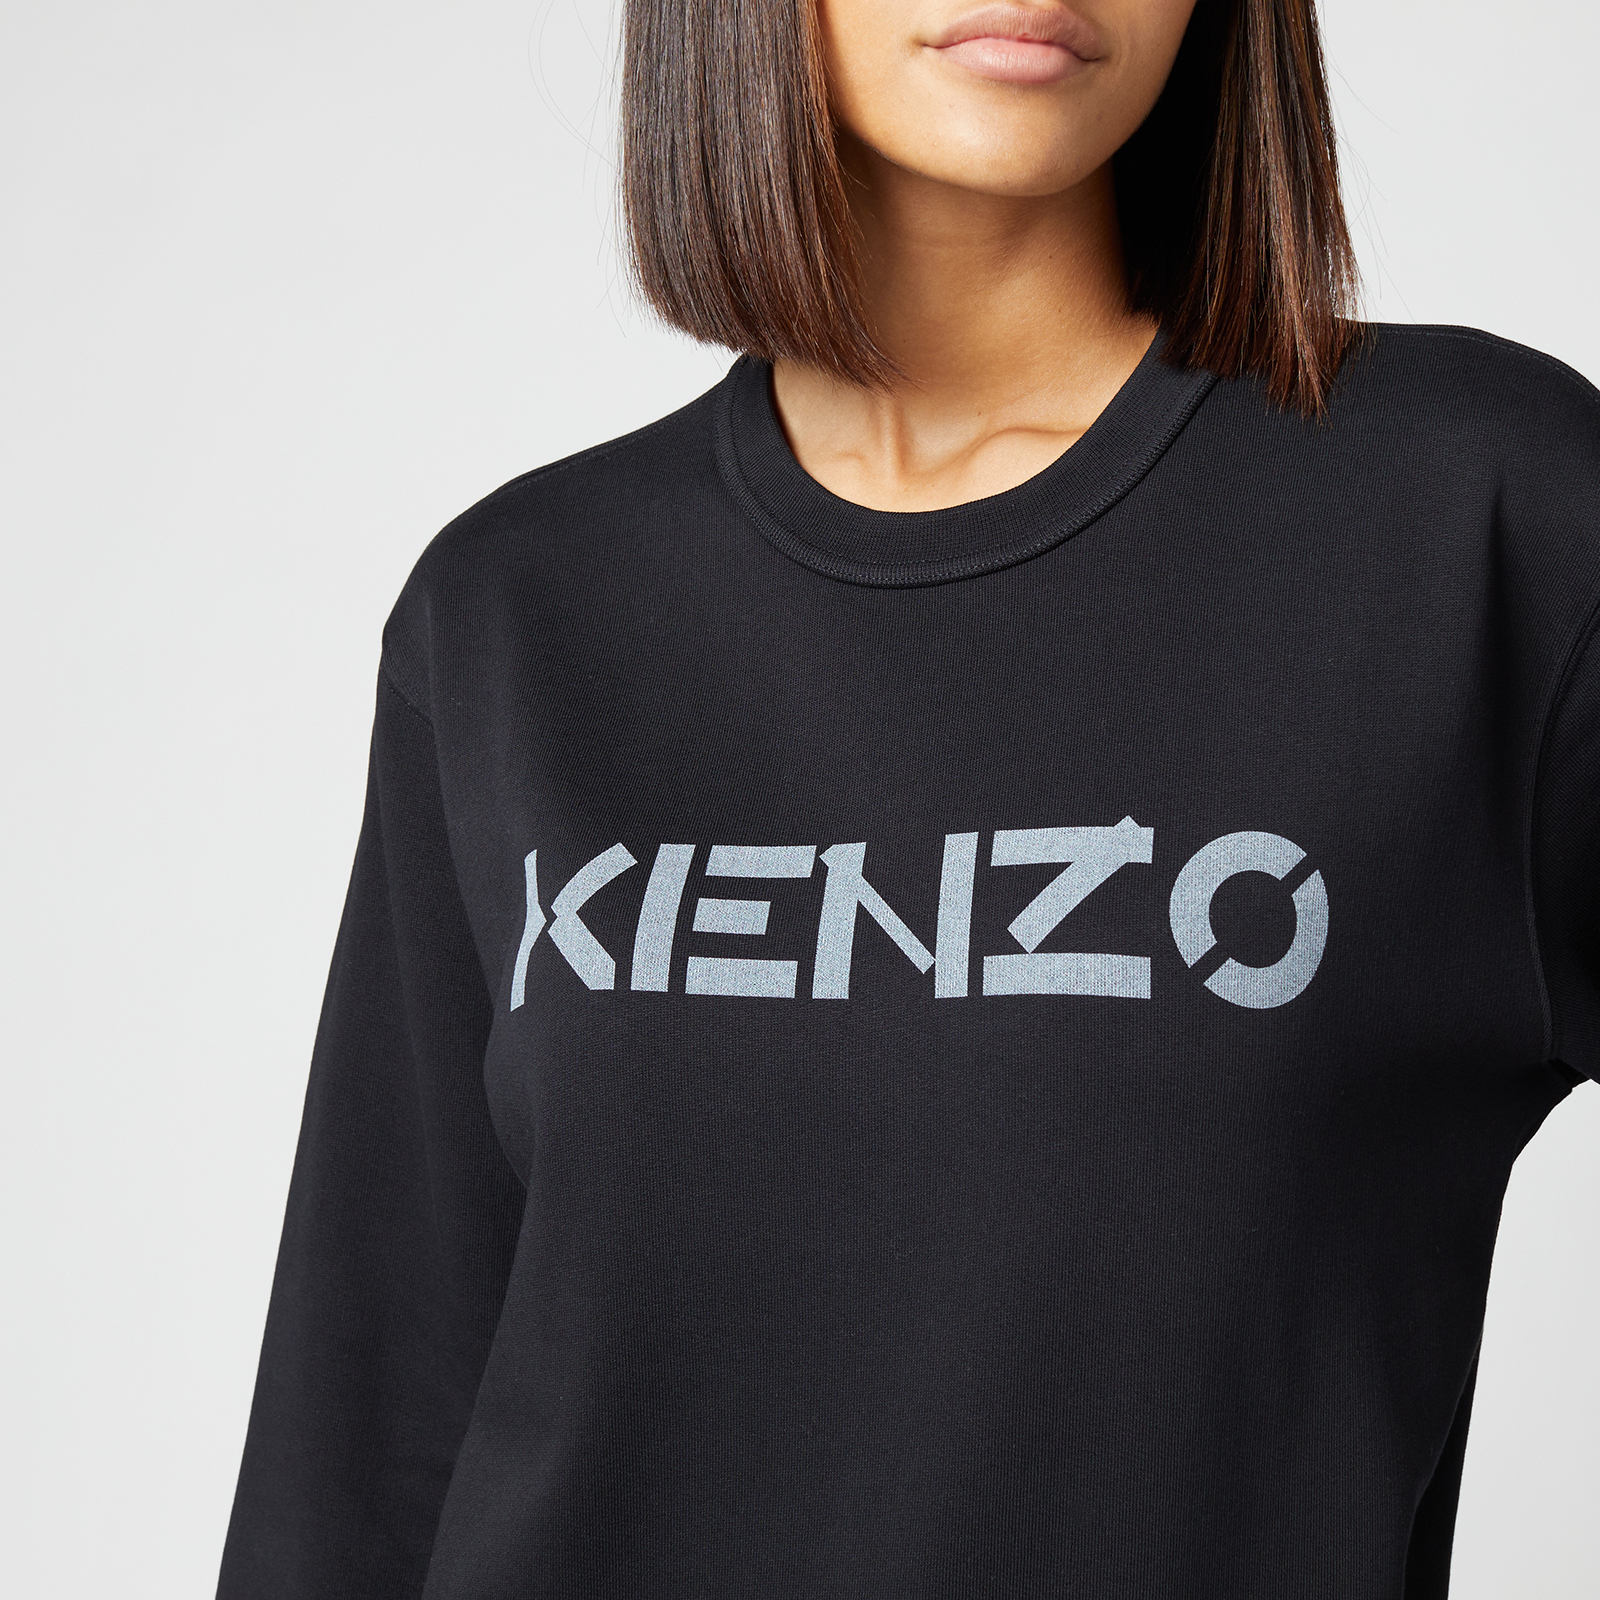 8 Cool Facts About Kenzo - The Fact Shop